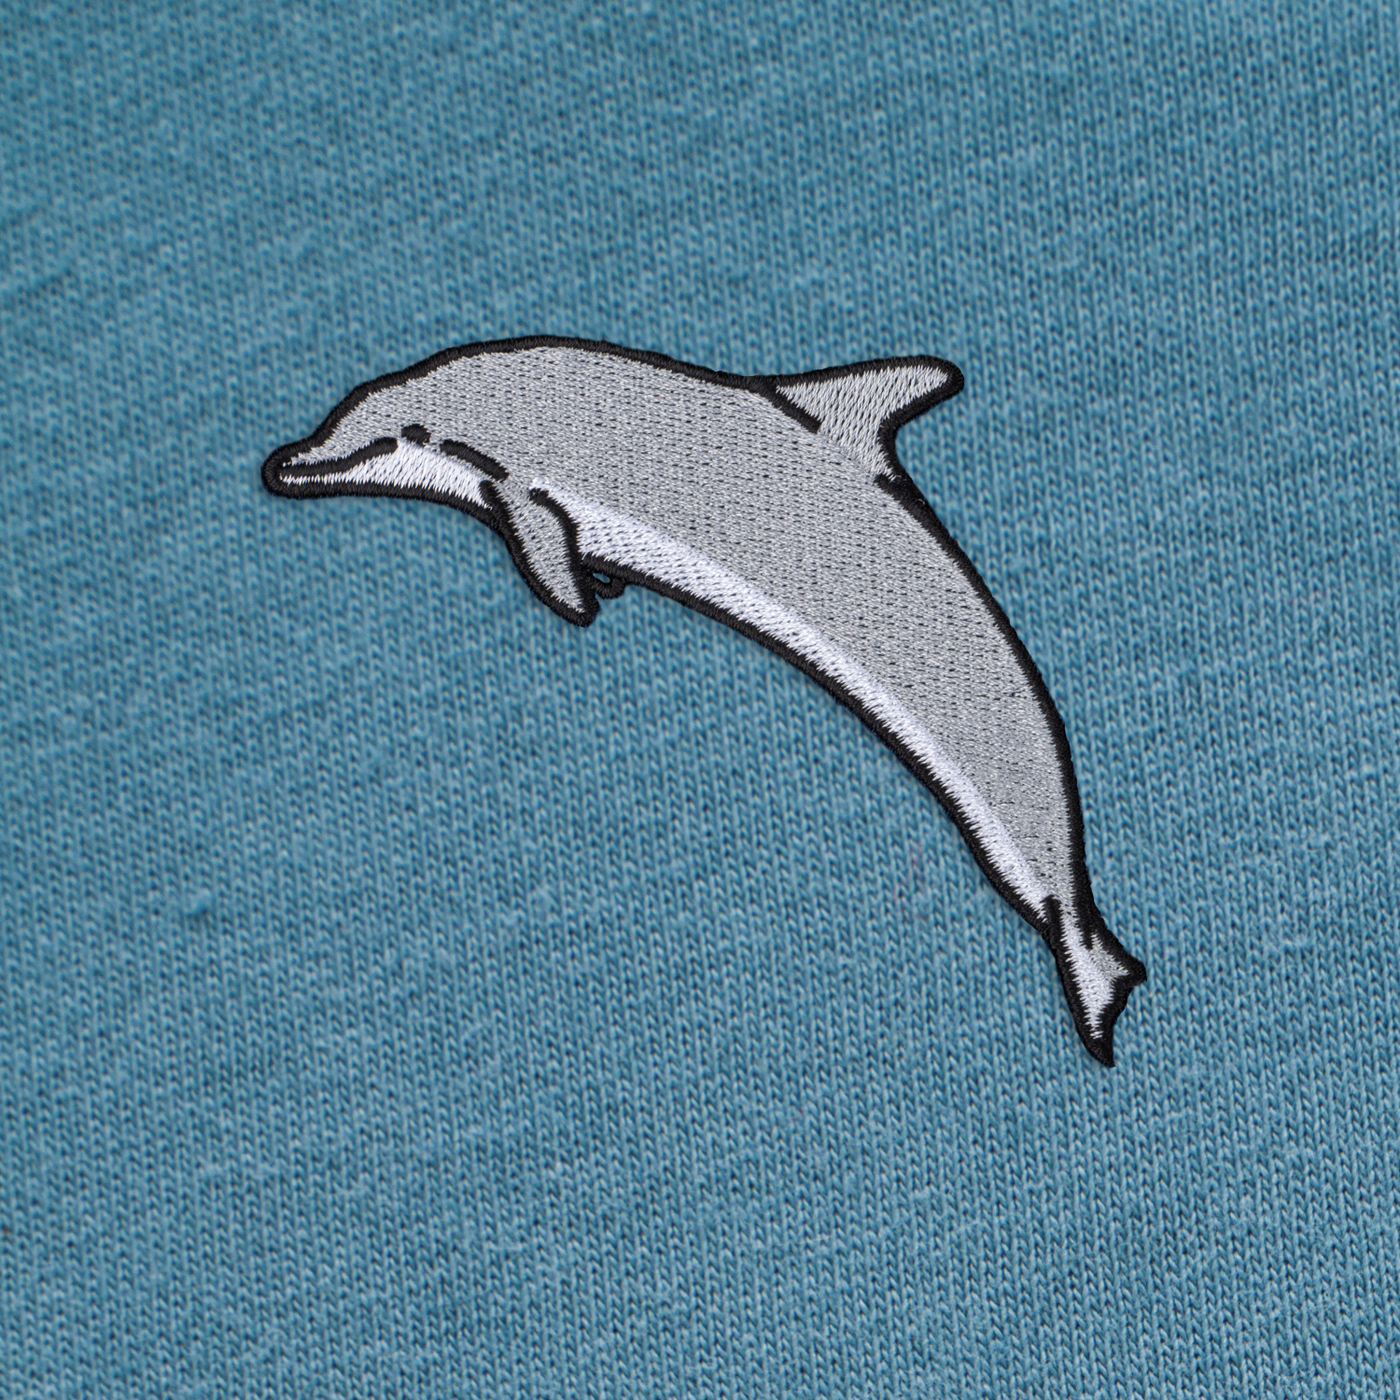 Bobby's Planet Men's Embroidered Dolphin T-Shirt from Seven Seas Fish Animals Collection in Steel Blue Color#color_steel-blue